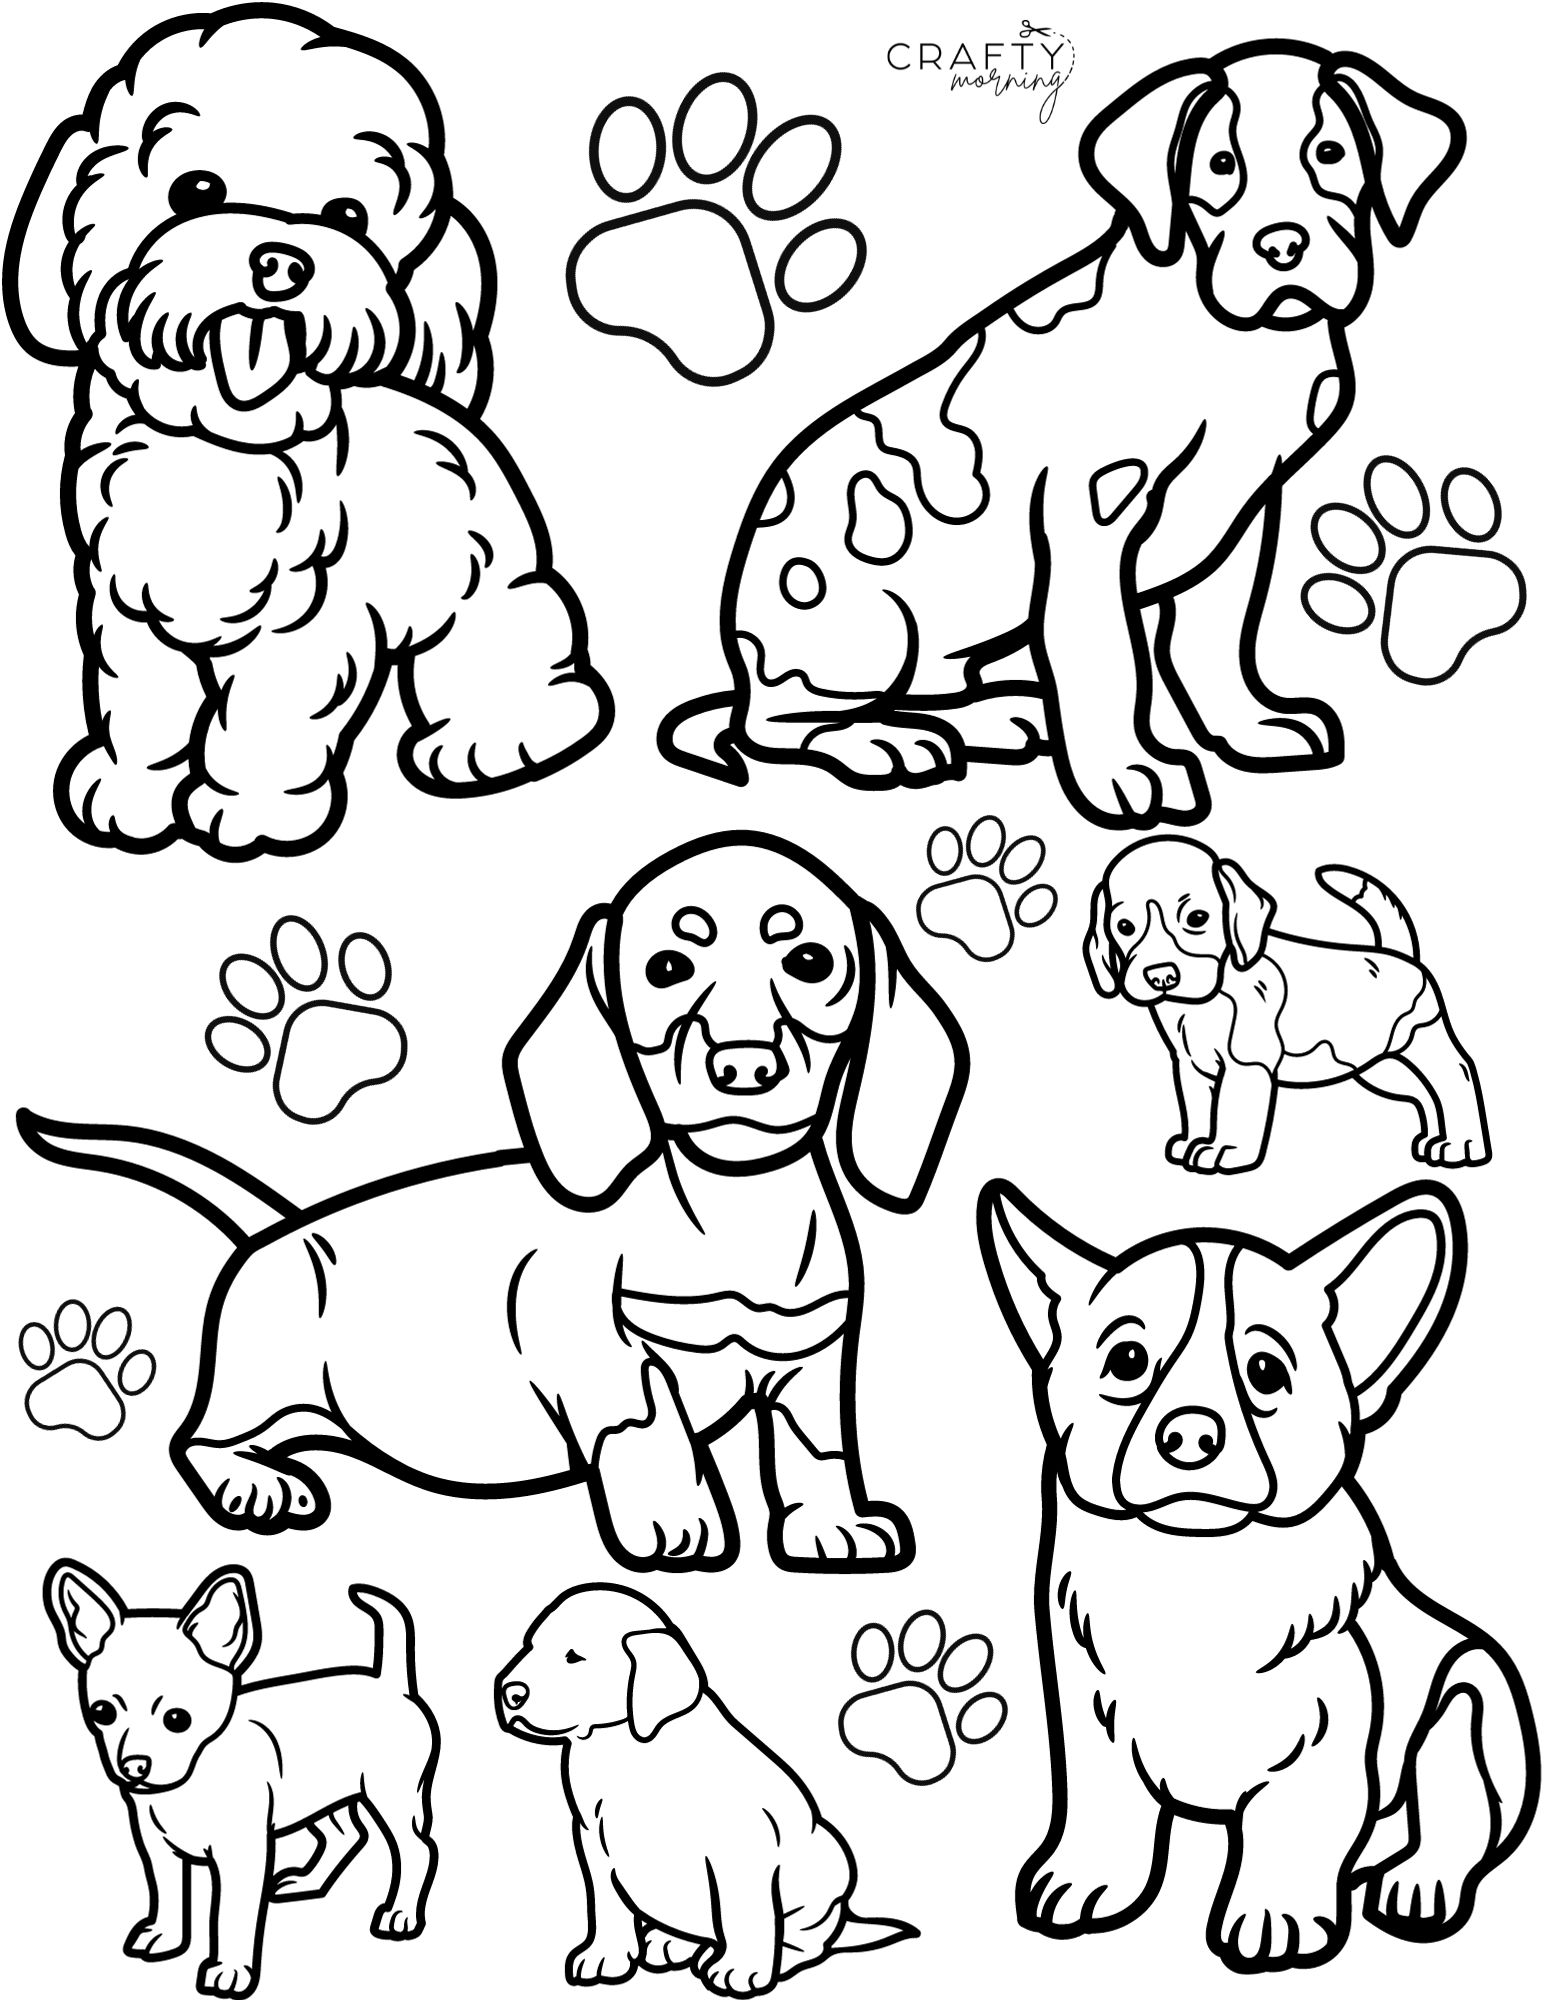 Cute dog coloring pages to print